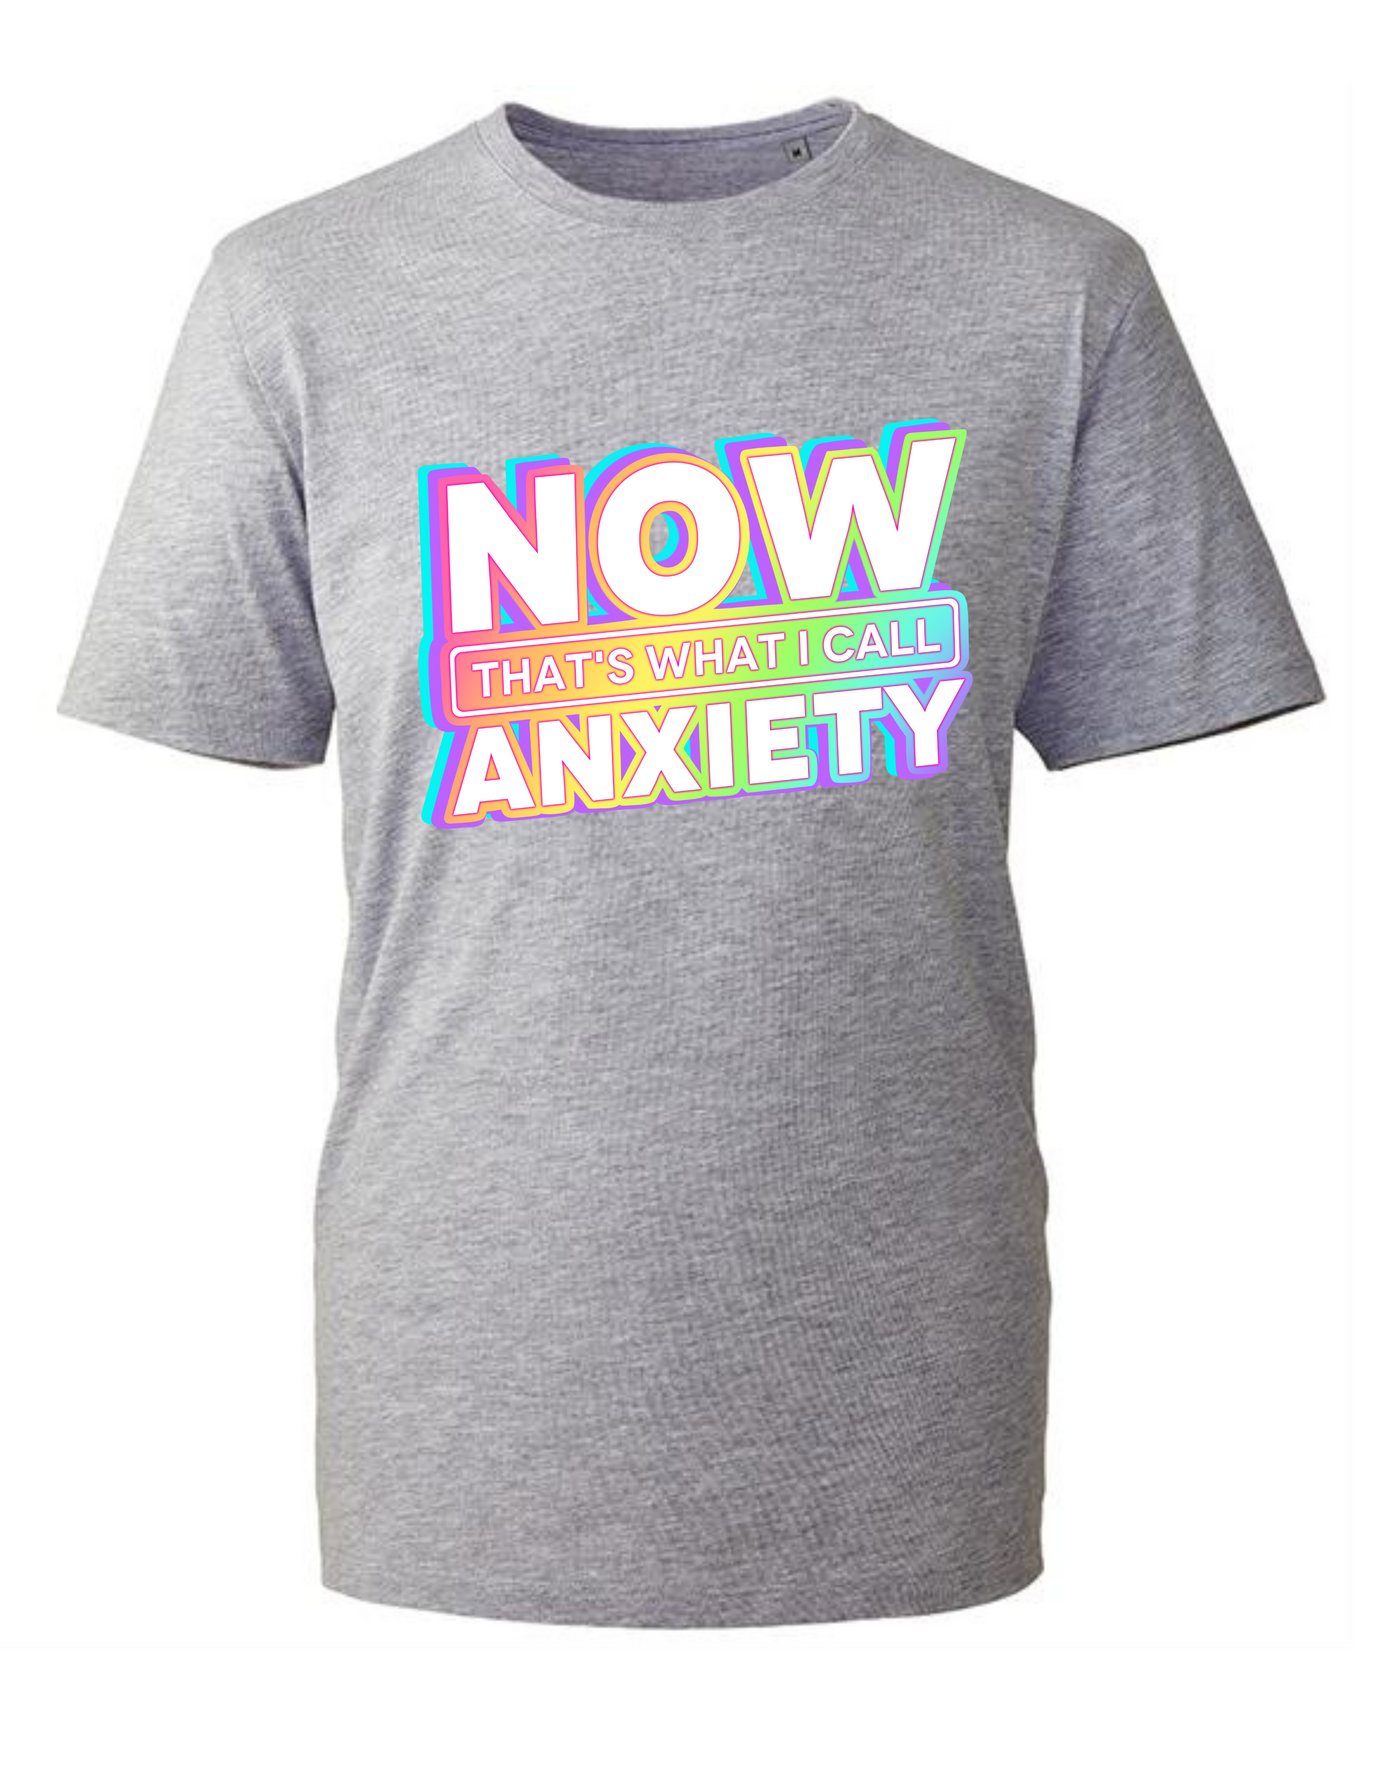 "Now That's What I Call Anxiety" Unisex Organic T-Shirt